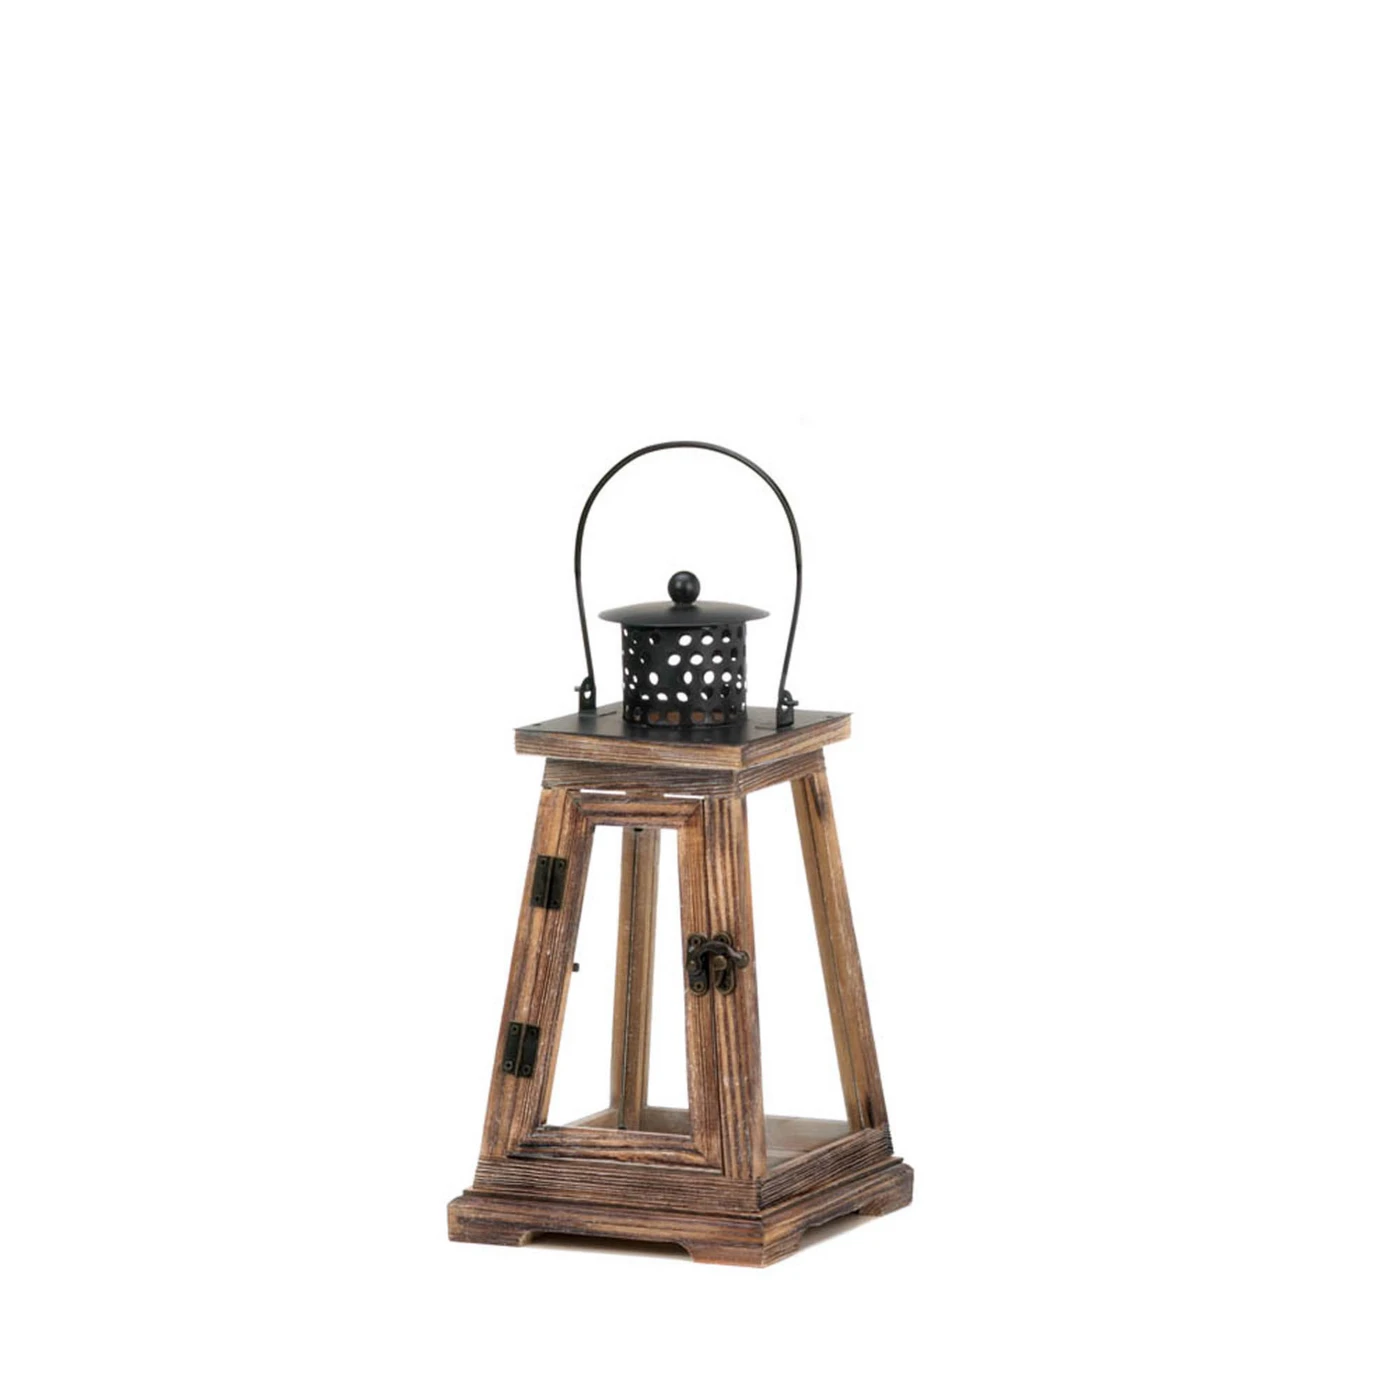 IDEAL SMALL CANDLE LANTERN - $33.00